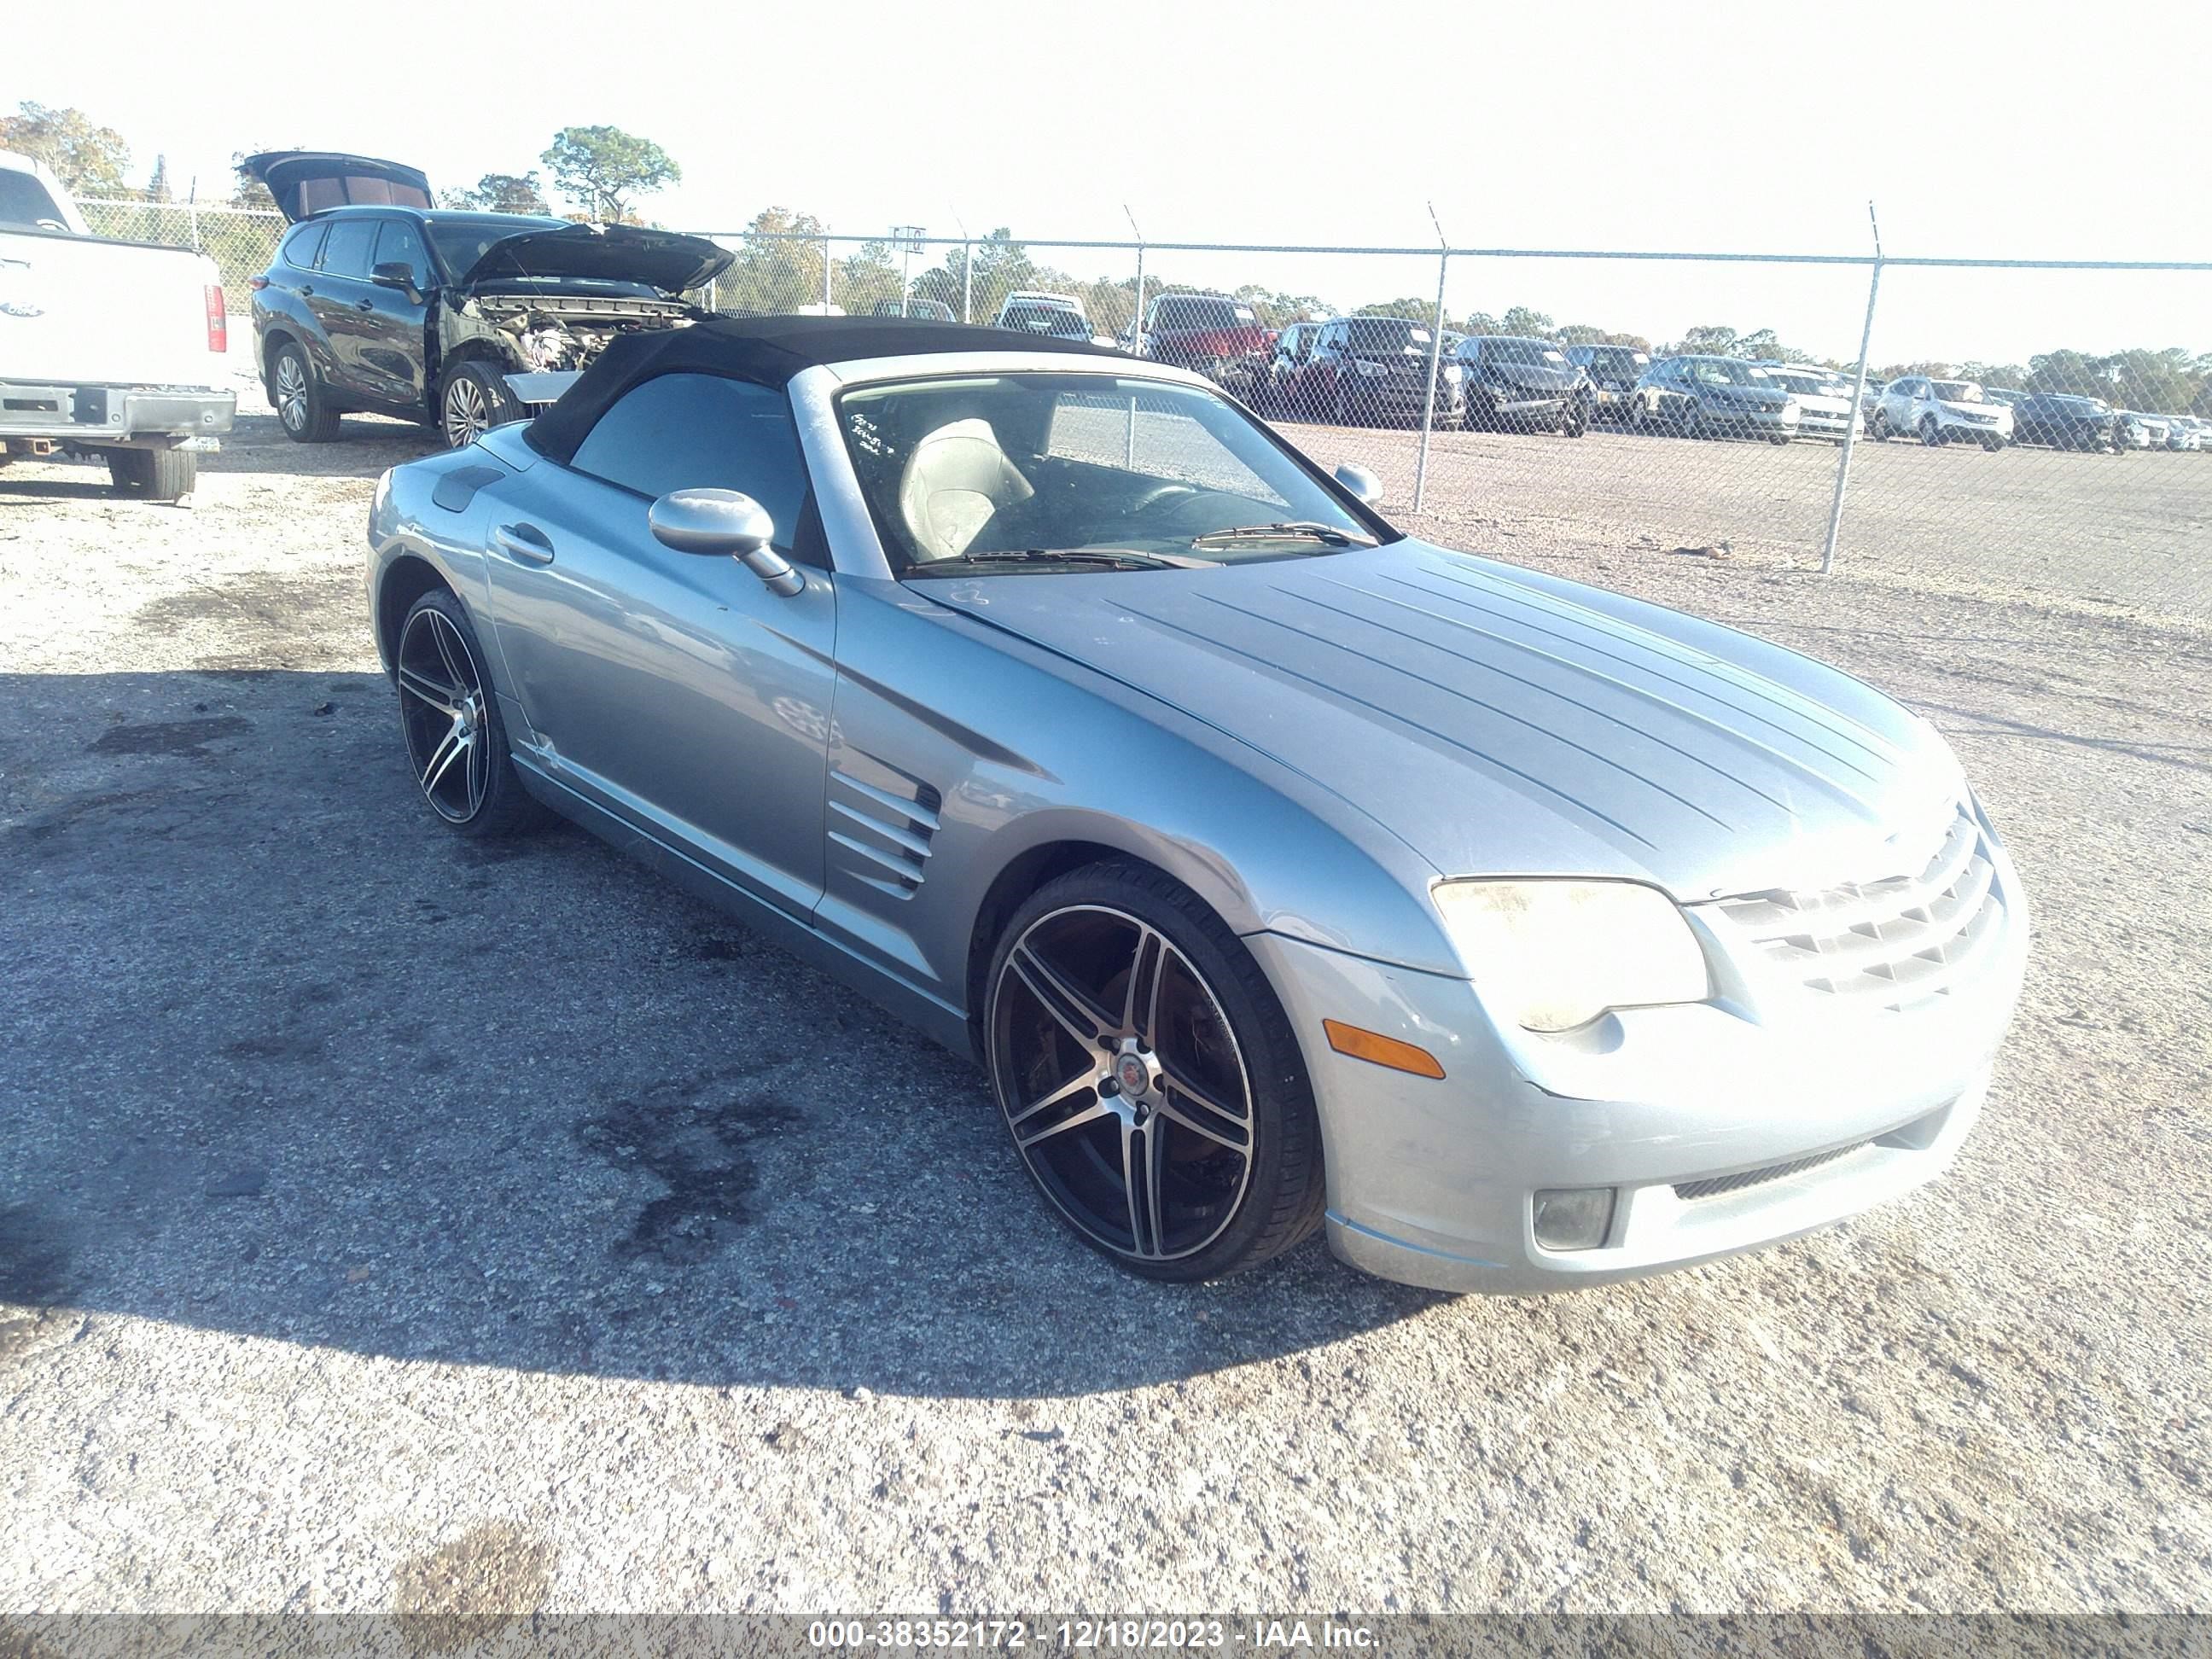 vin: 1C3AN65LX5X056851 1C3AN65LX5X056851 2005 chrysler crossfire 3200 for Sale in 34667, 8838 Bolton Ave, Hudson, USA